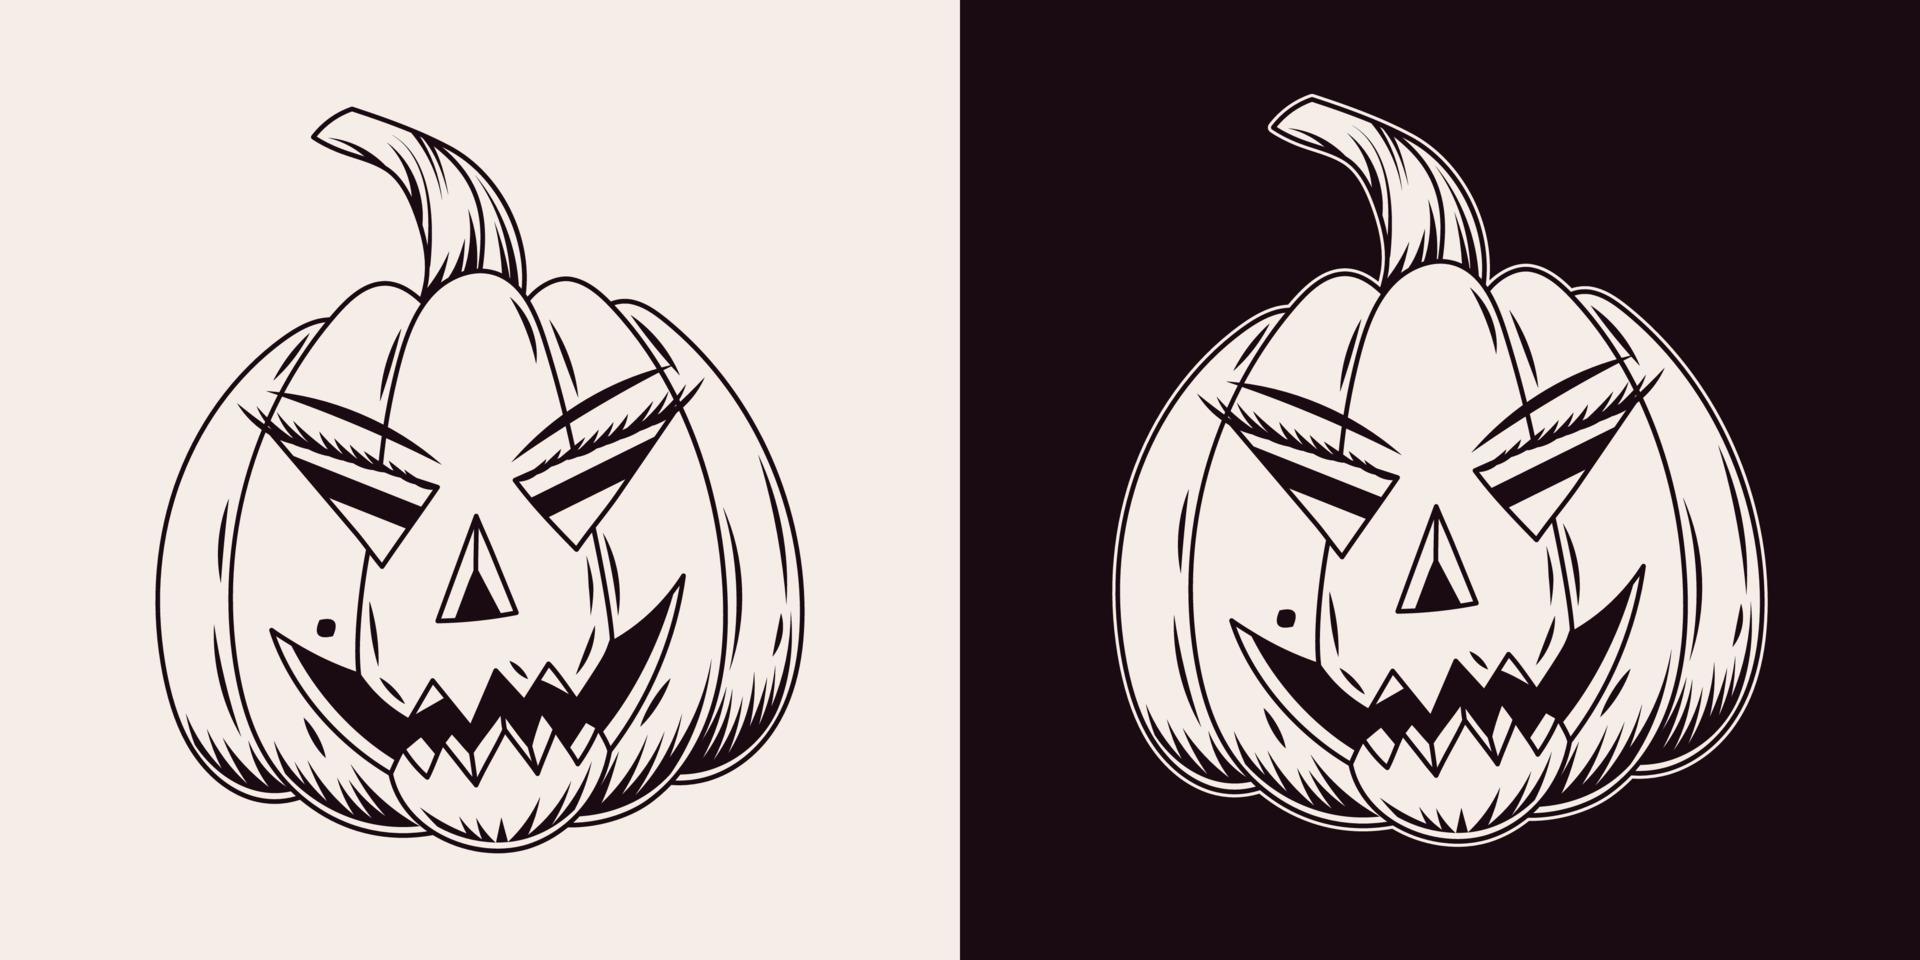 Halloween pumpkin with happy grinning smile, scary grimace. Stylized as female face. Traditional jack o lantern. Monochrome vector illustration isolated on a white, black background.